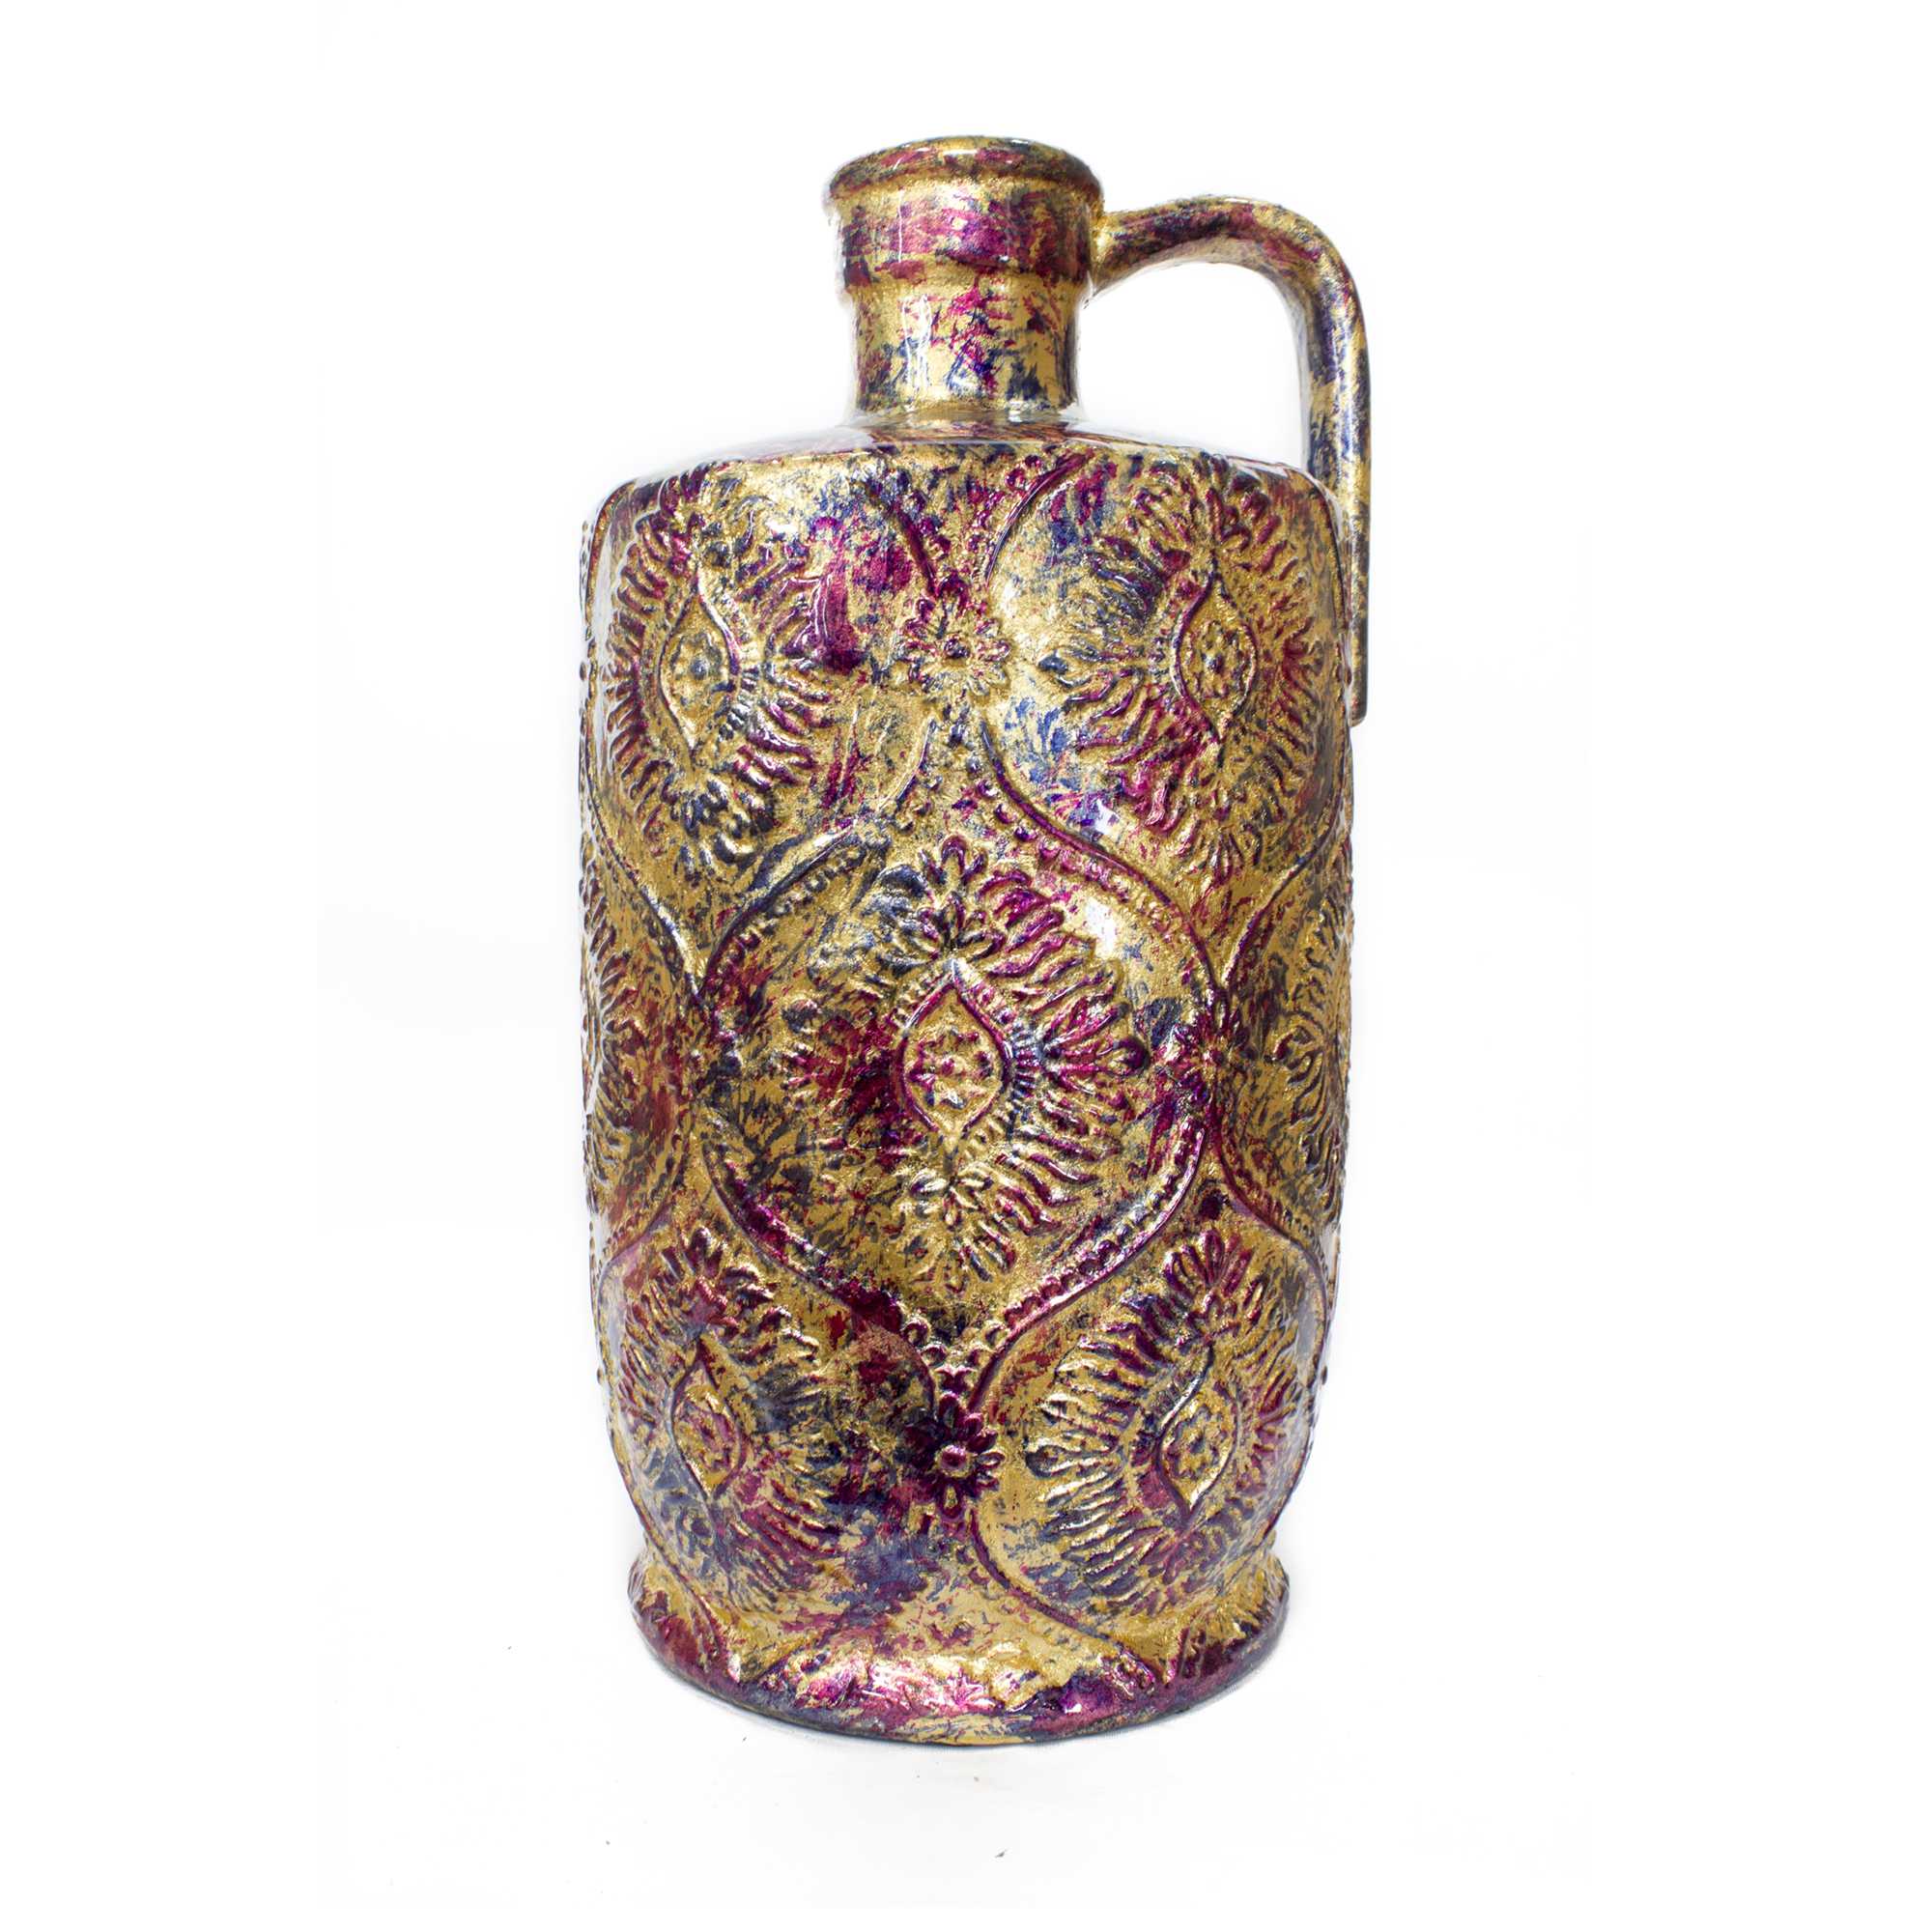 Amber Pink and Purple Foil and Lacquer Damask Stamped Jug Vase